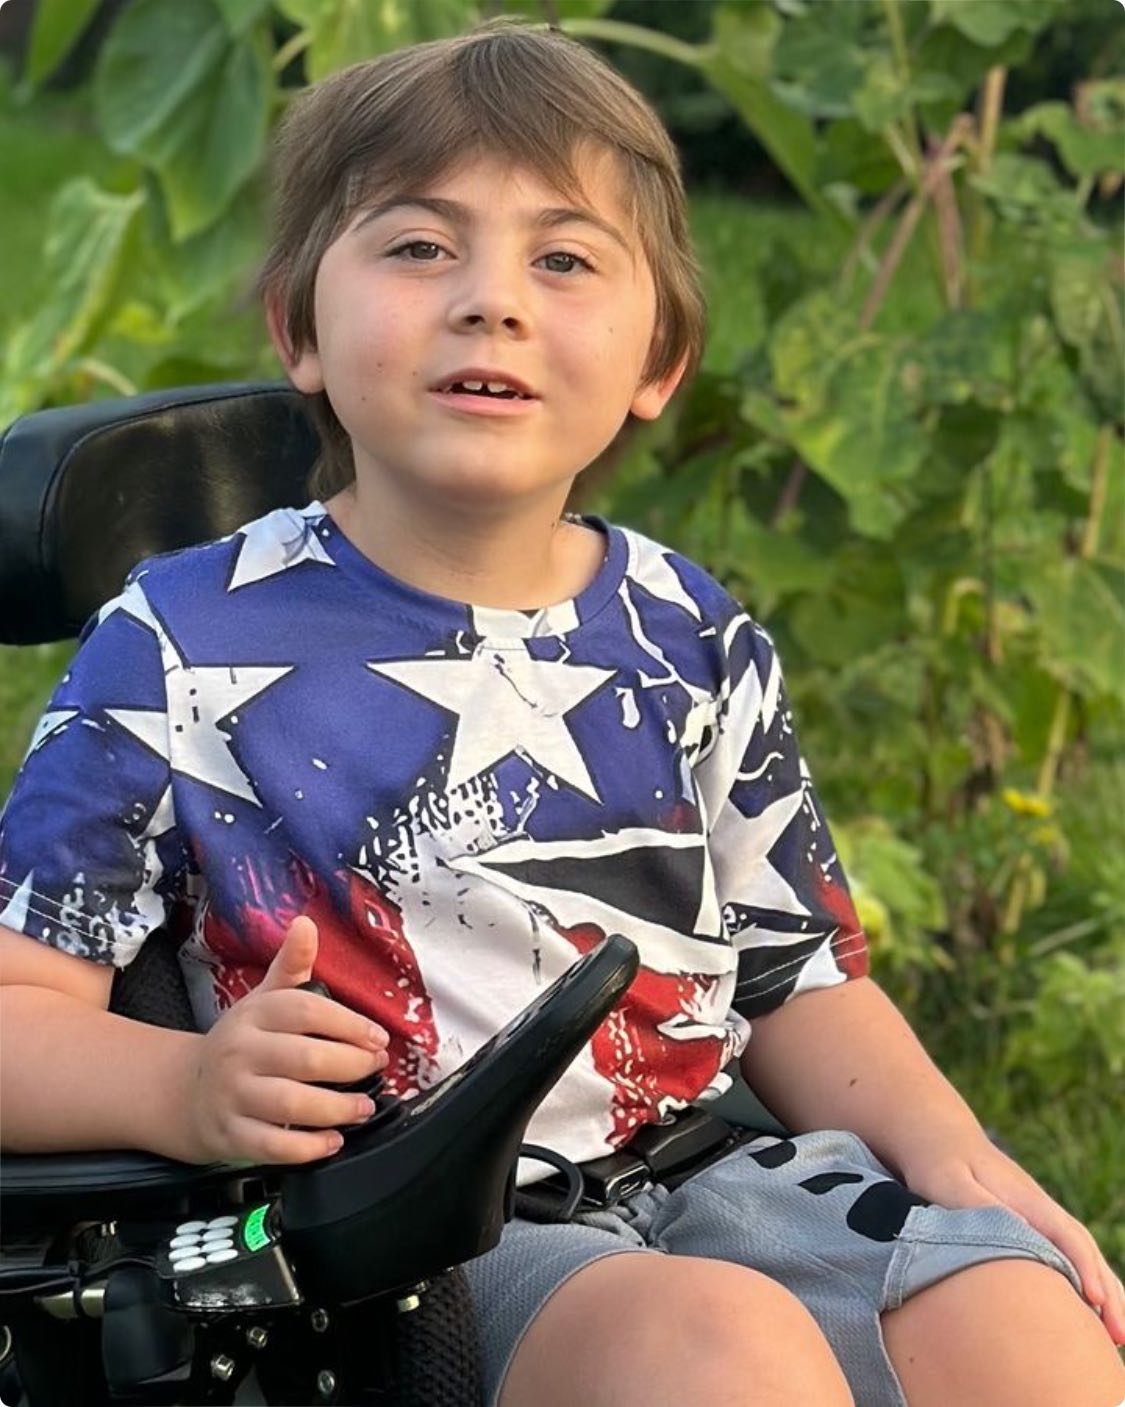 Hey gang - my nephew, Liam, has muscular dystrophy and is wheelchair bound. Recently, the wheelchair accessible van that they use to take him to doctors appointments and physical therapy broke down and can&rsquo;t be repaired. We are raising money to